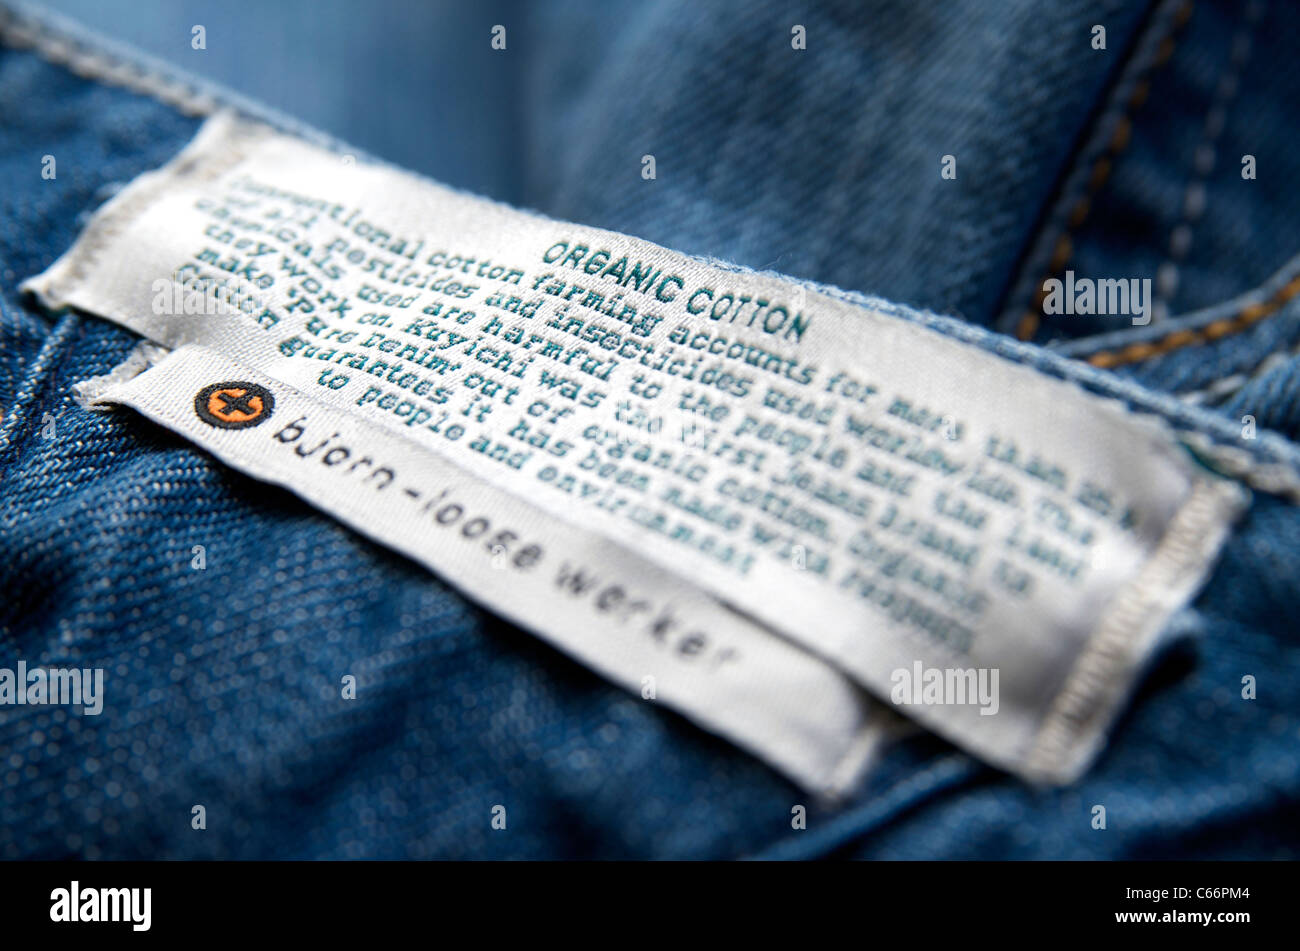 Organic cotton label on a jeans from Kuyichi Stock Photo - Alamy